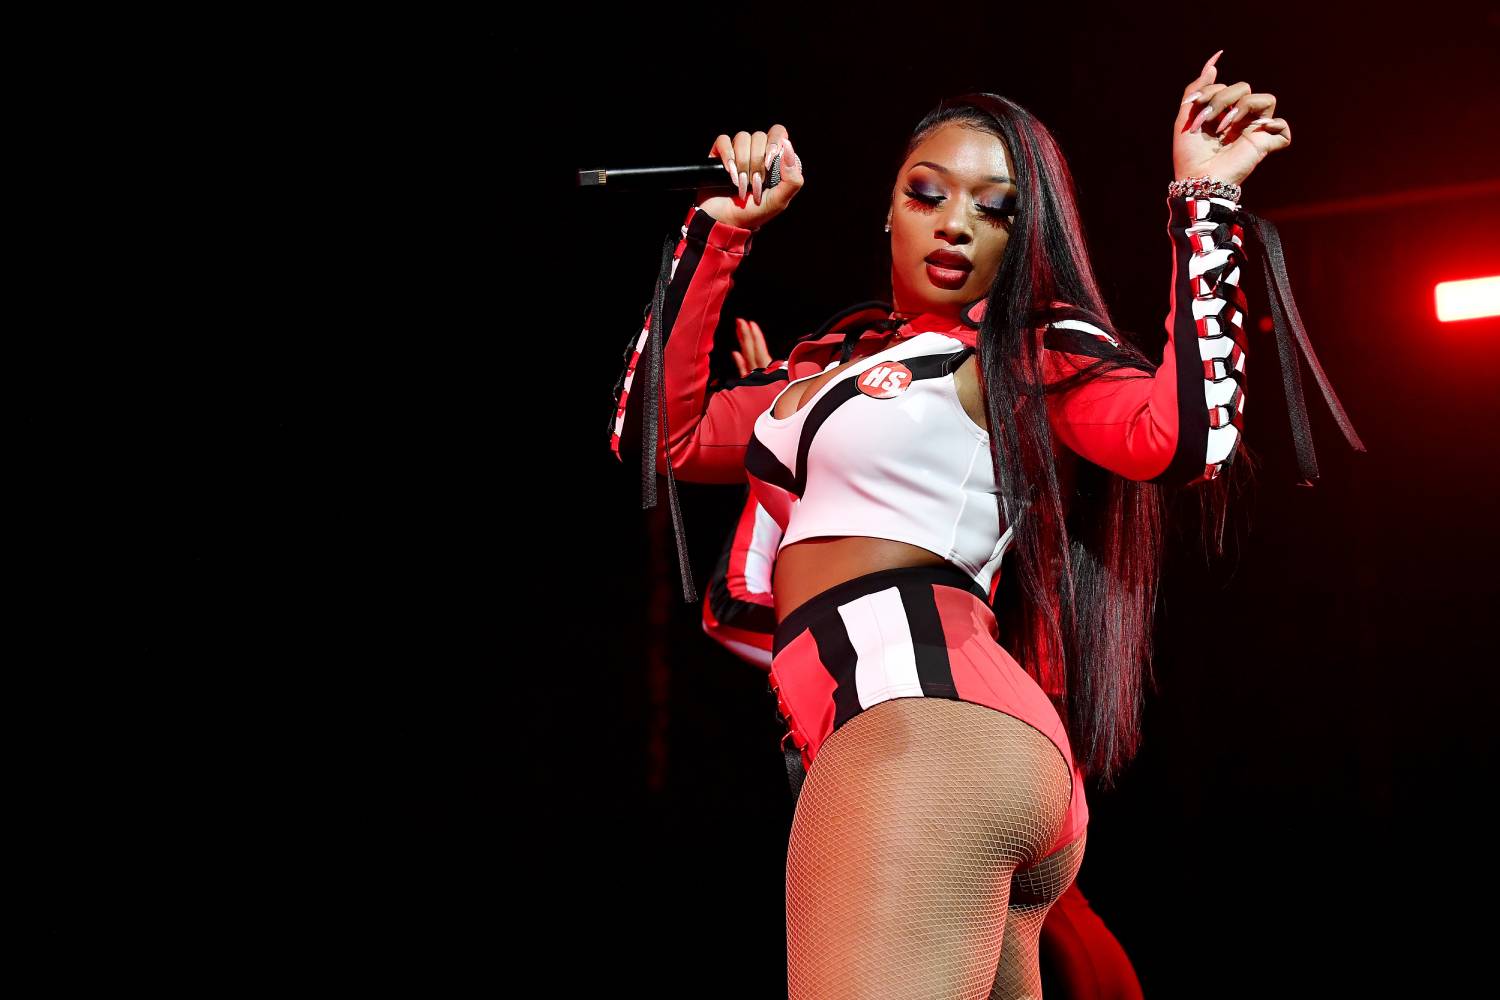 Megan Thee Stallion performs onstage during the EA Sports Bowl at Bud Light Super Bowl Music Fest on January 30, 2020 in Miami, Florida.